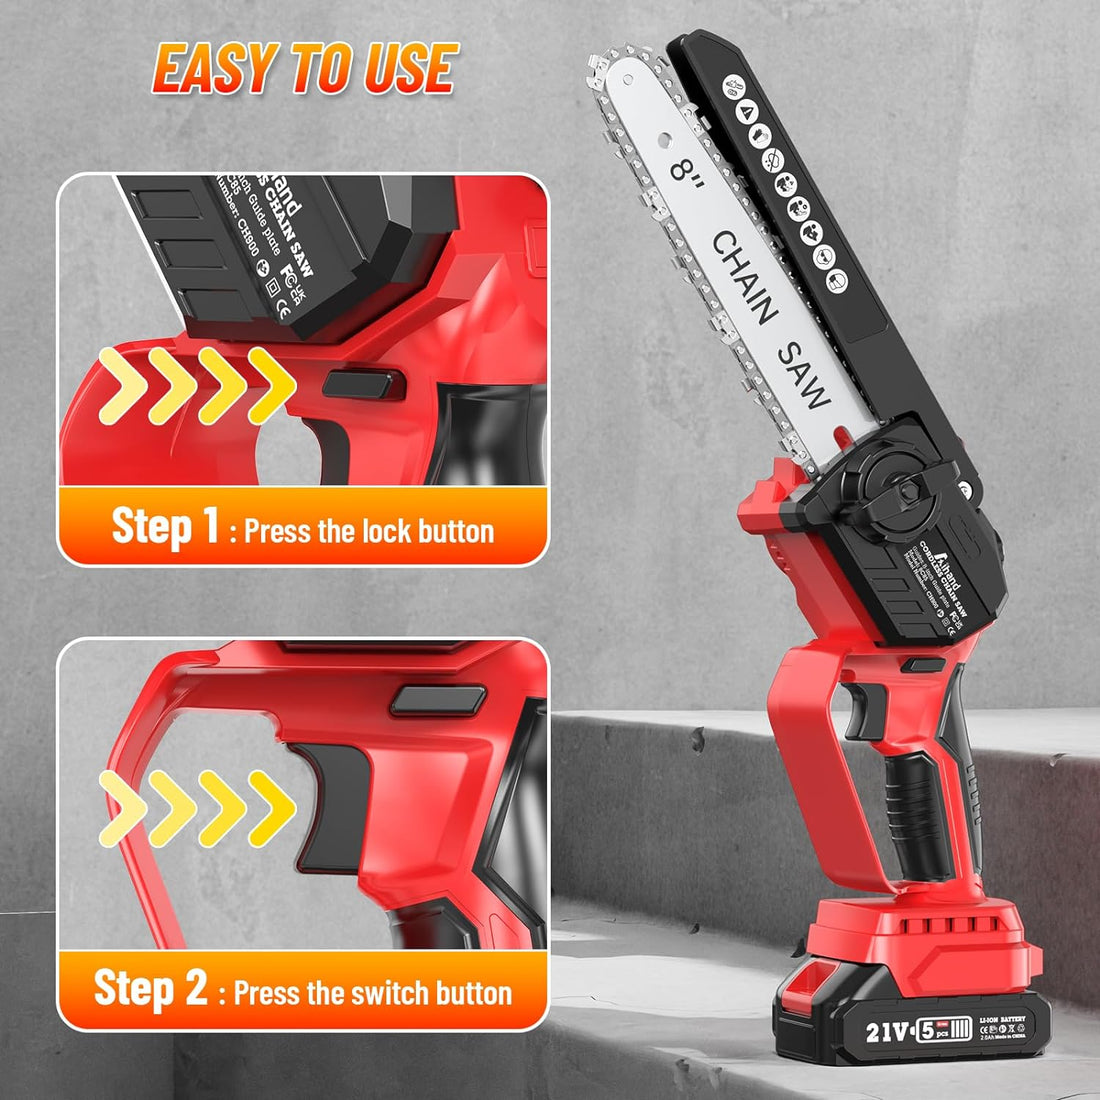 Mini Brushless Chainsaw Cordless 8 Inch - Aihand Electric Chain Saw Battery Powered with 2 * 2000mAh Battery,Hand Held Saw for Garden Tree Pruning Braches Wood Cutting with Auto Oiler Chain